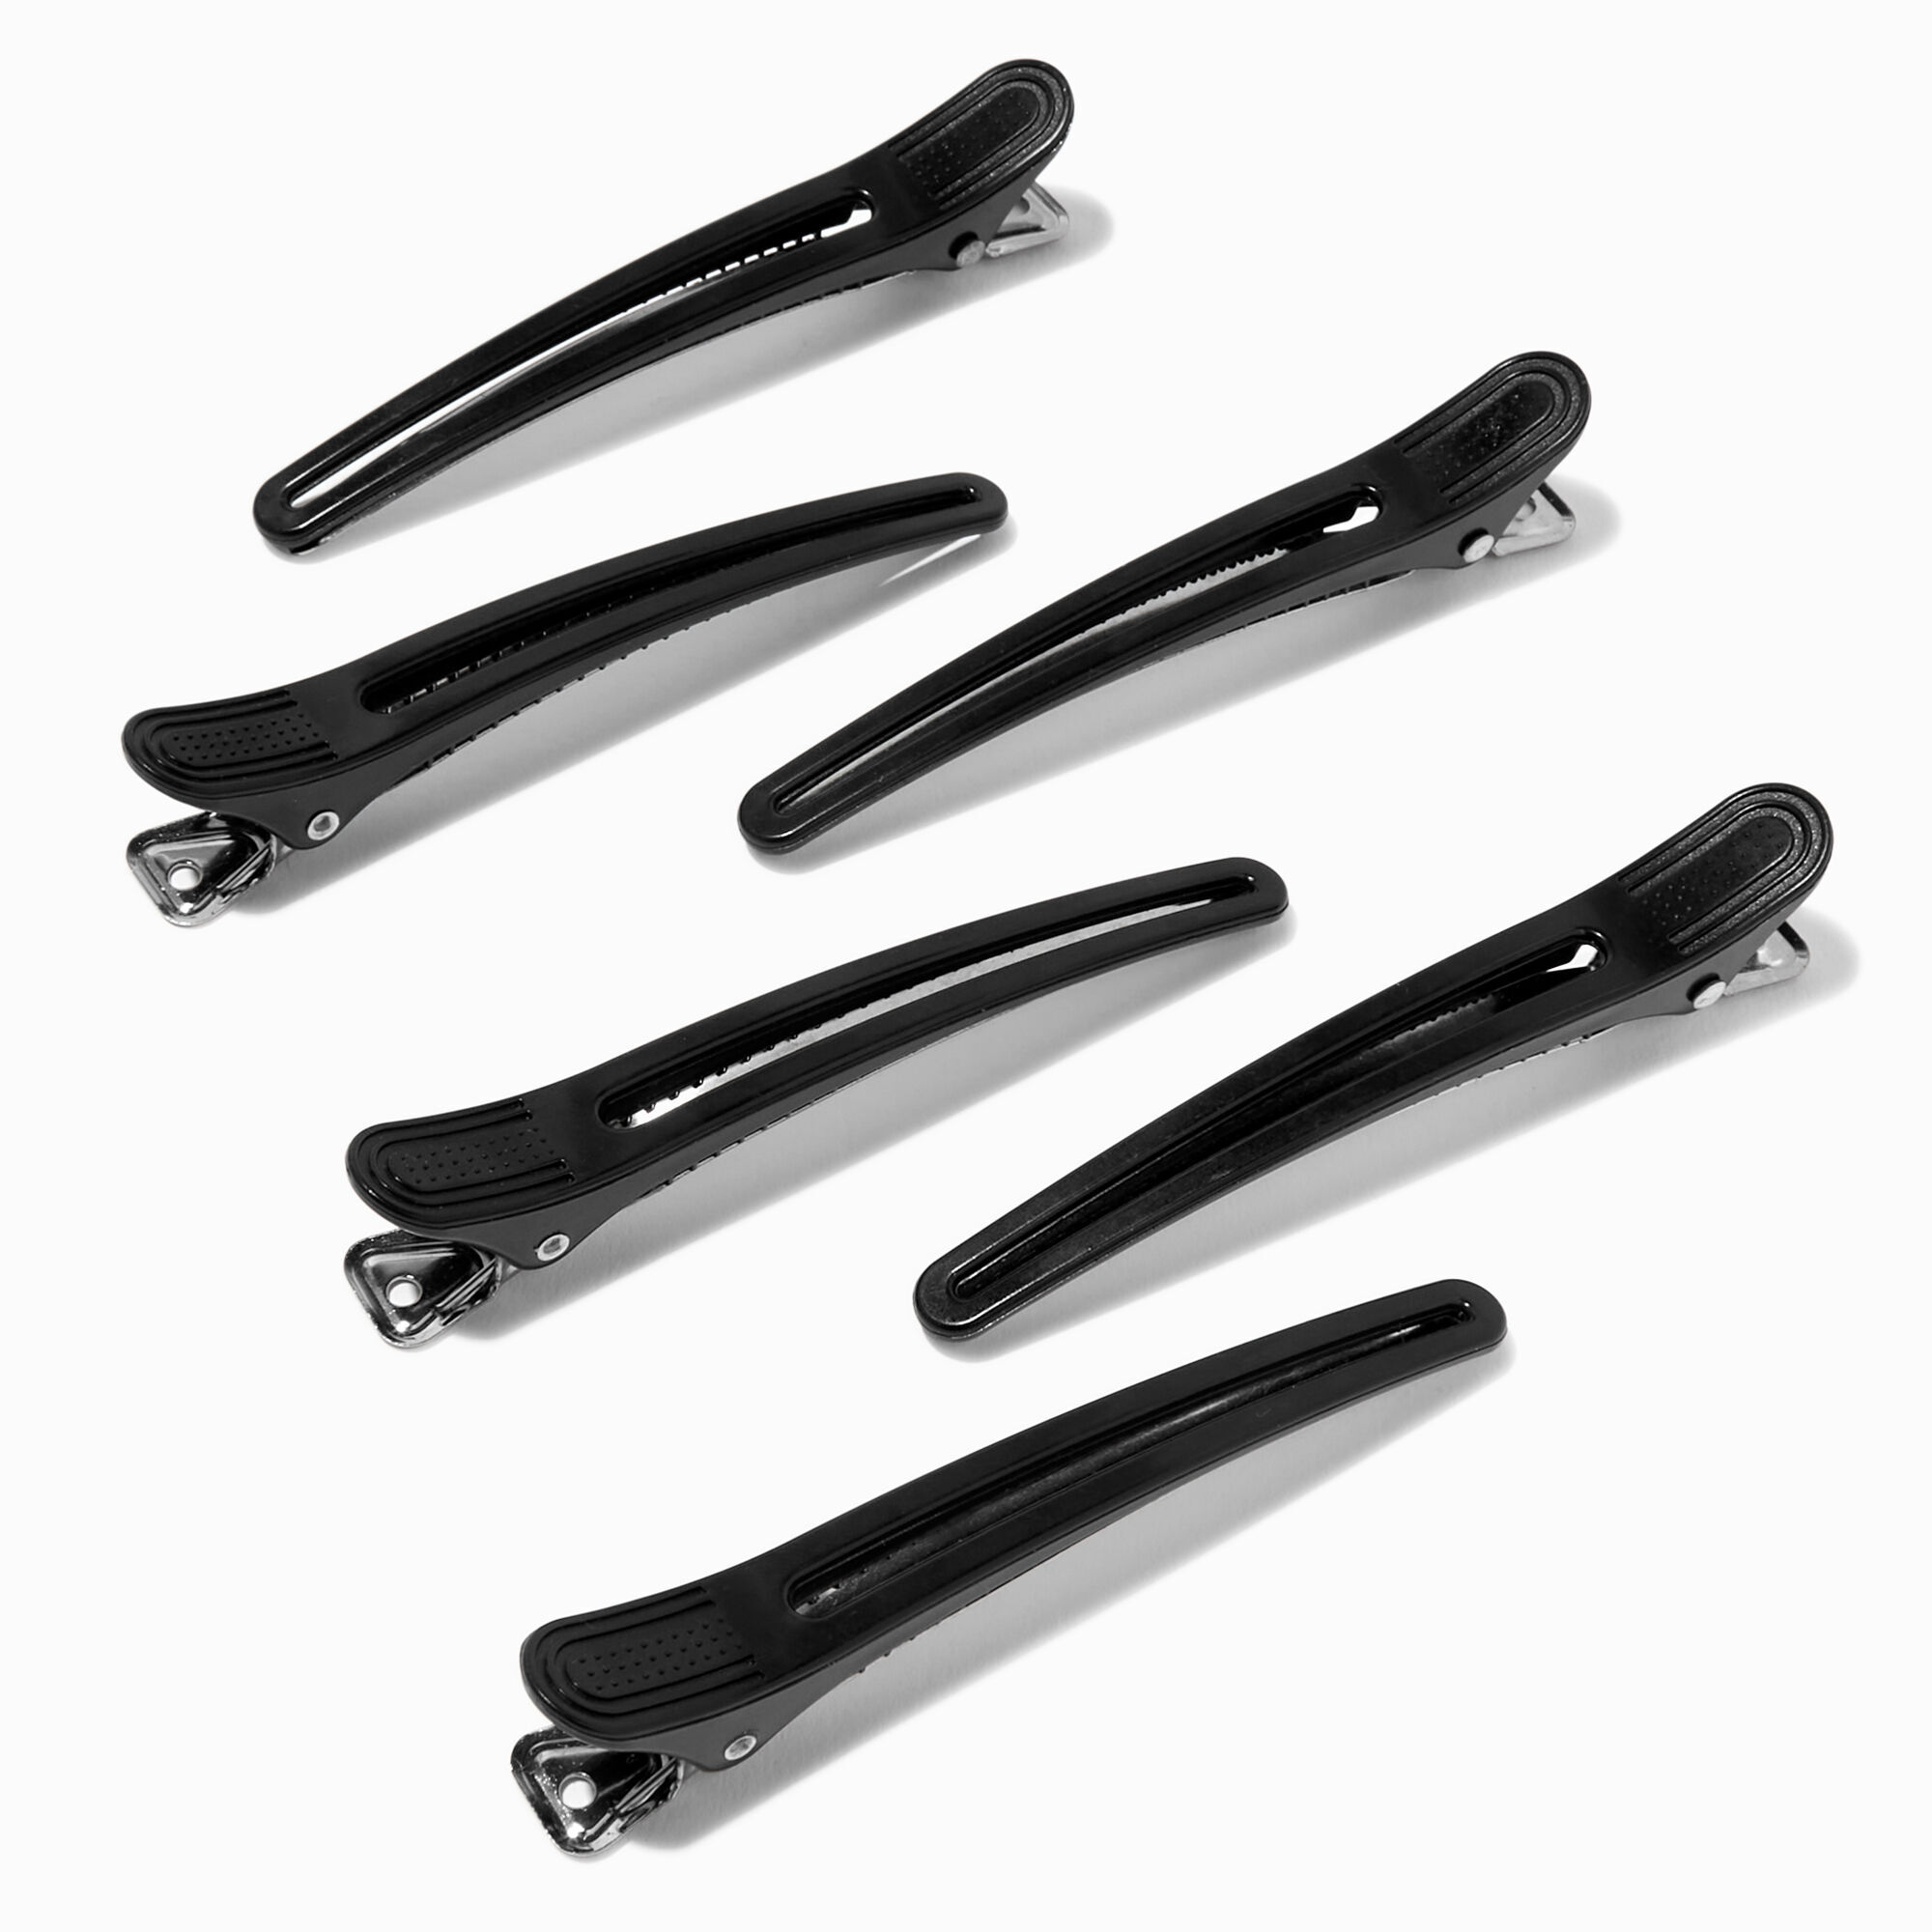 View Claires Beak Hair Styling Clips 6 Pack Black information